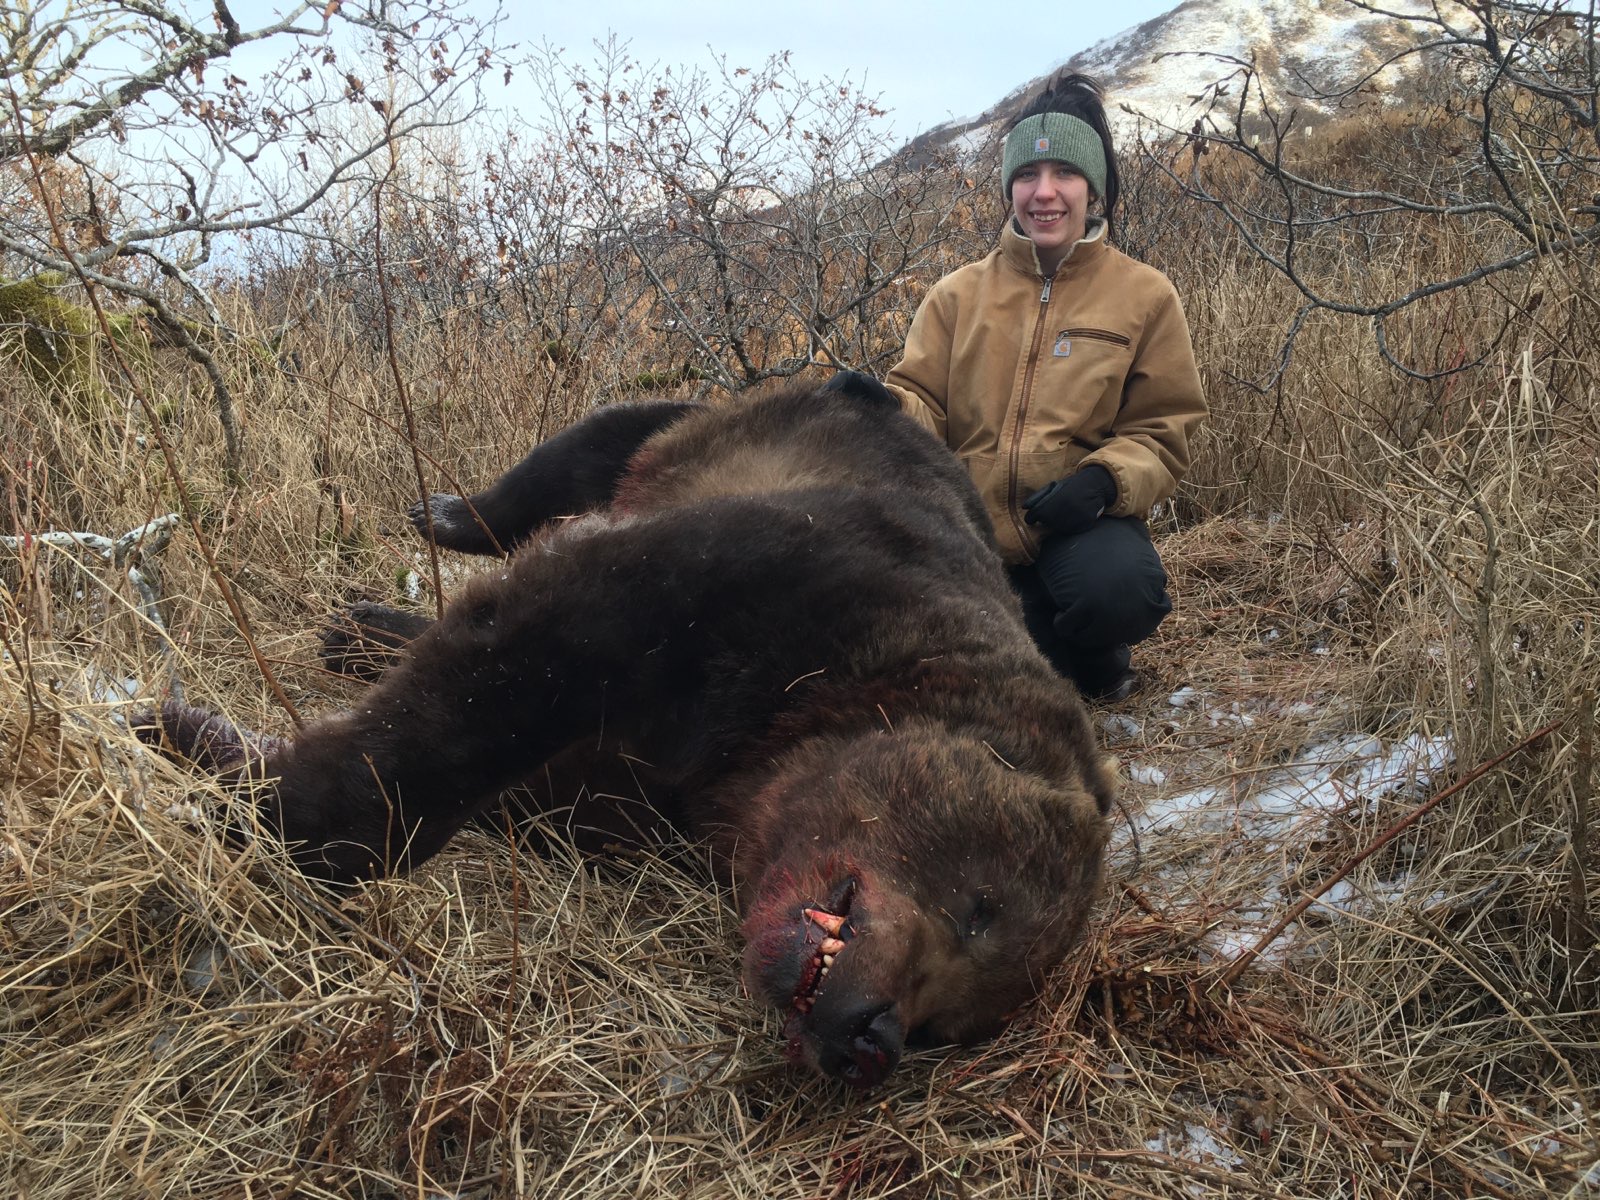 16-year-old hunter and brown bear